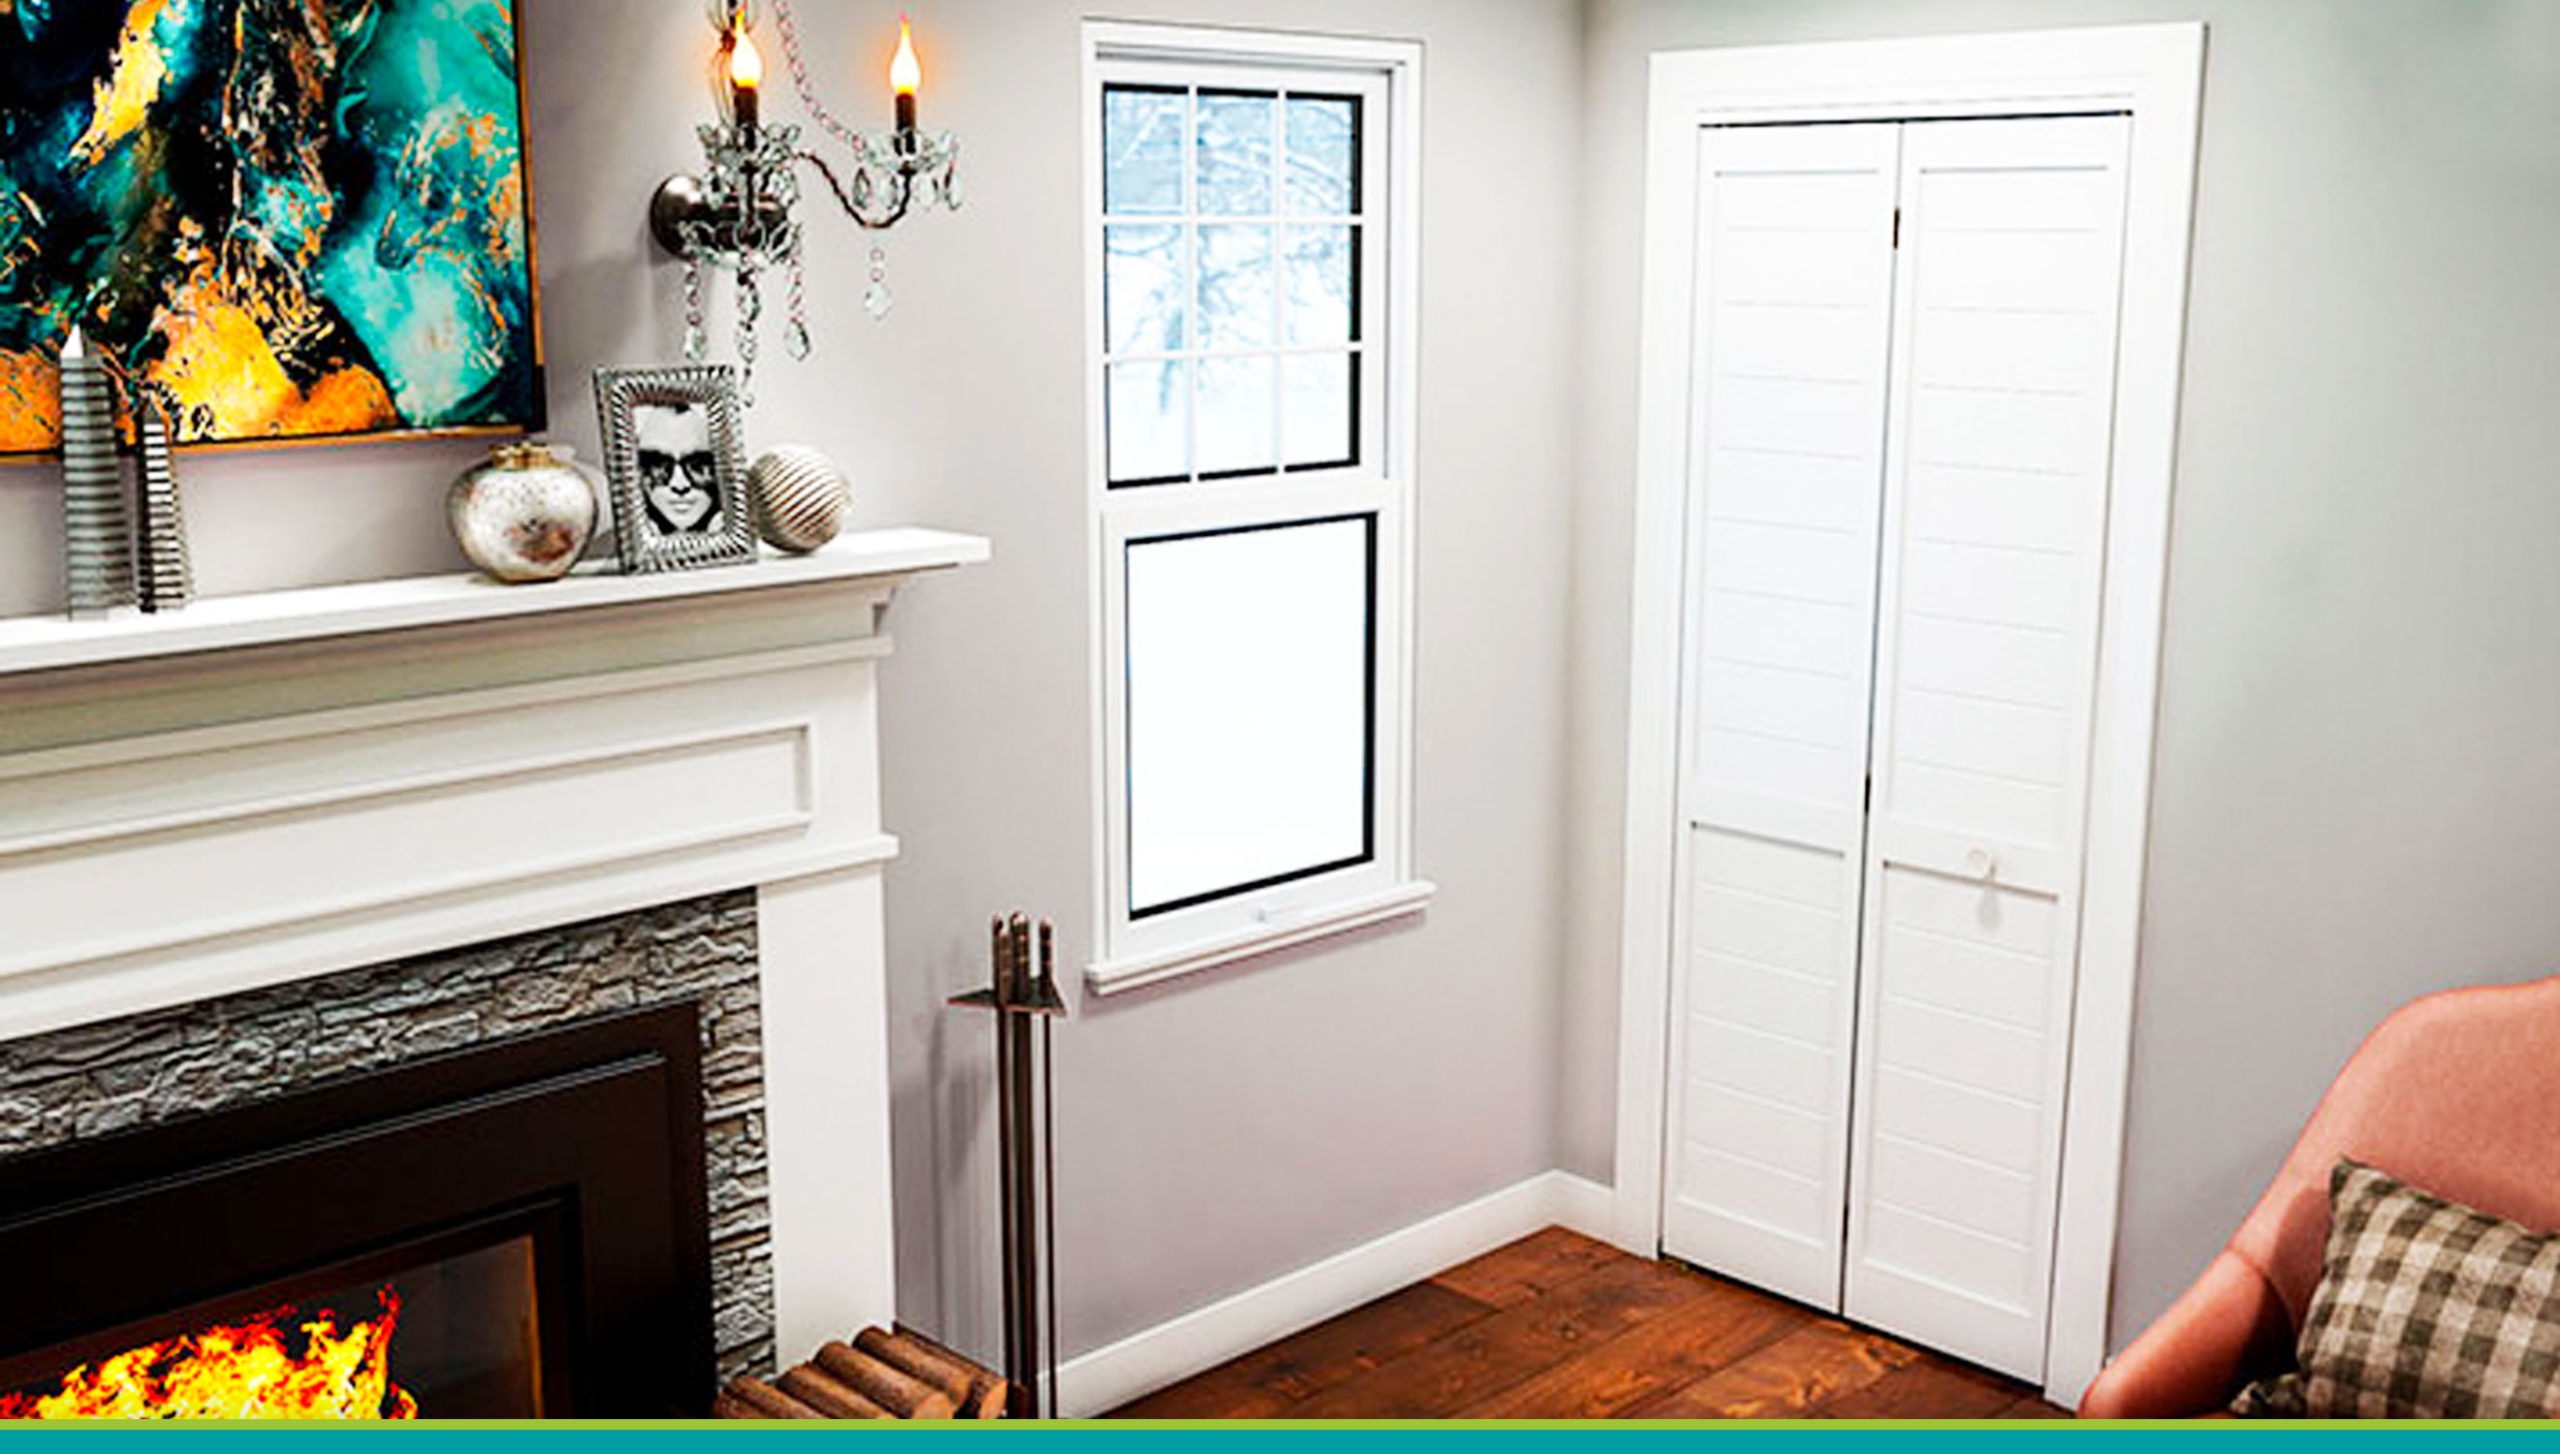 Door Finish Types: Do You Know Which Type EightDoors Uses?